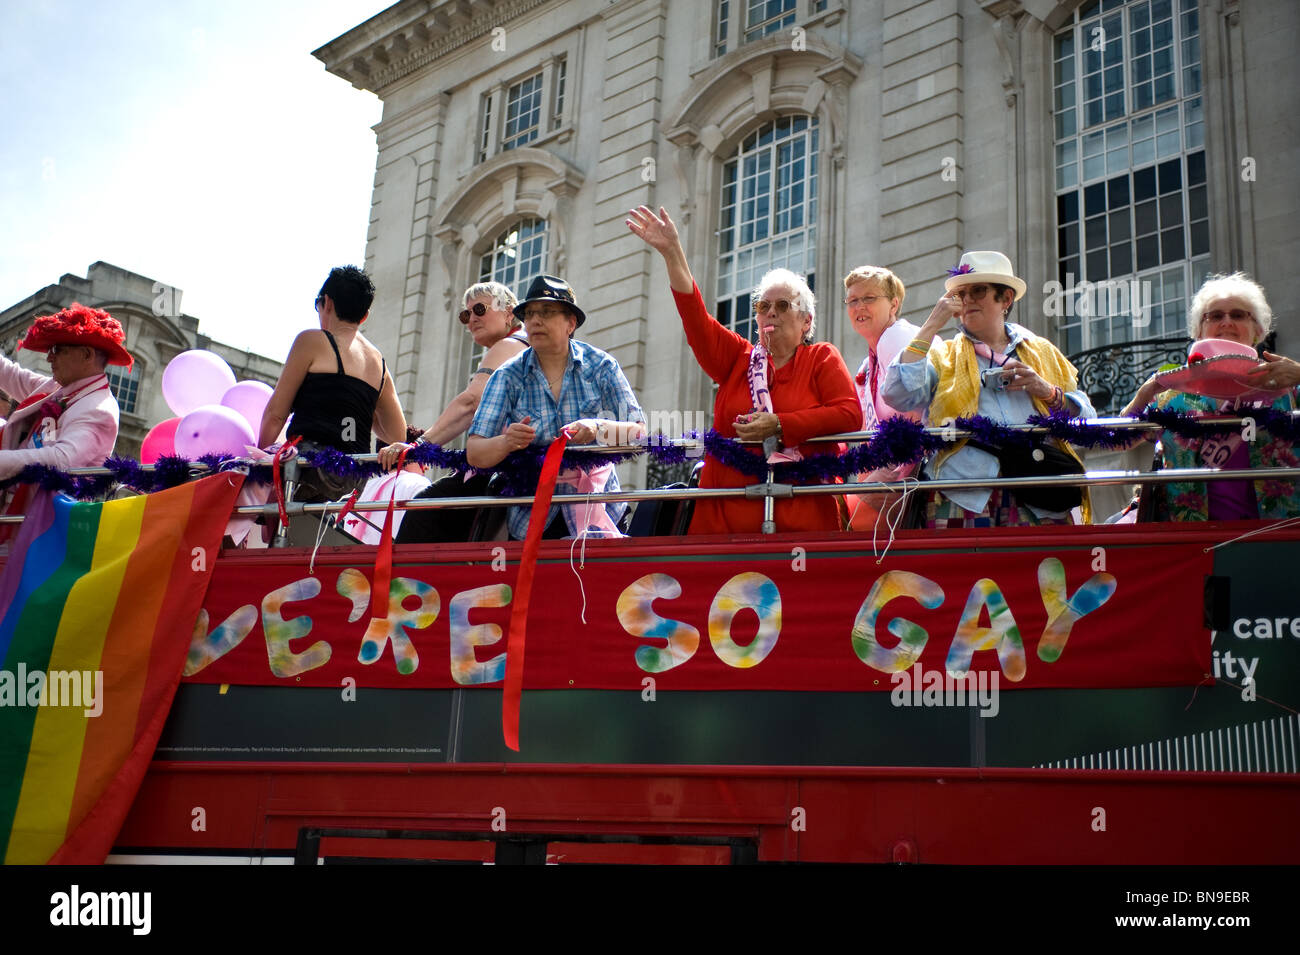 Elderly participants on an open top bus enjoying the London Pride celebrations. Stock Photo